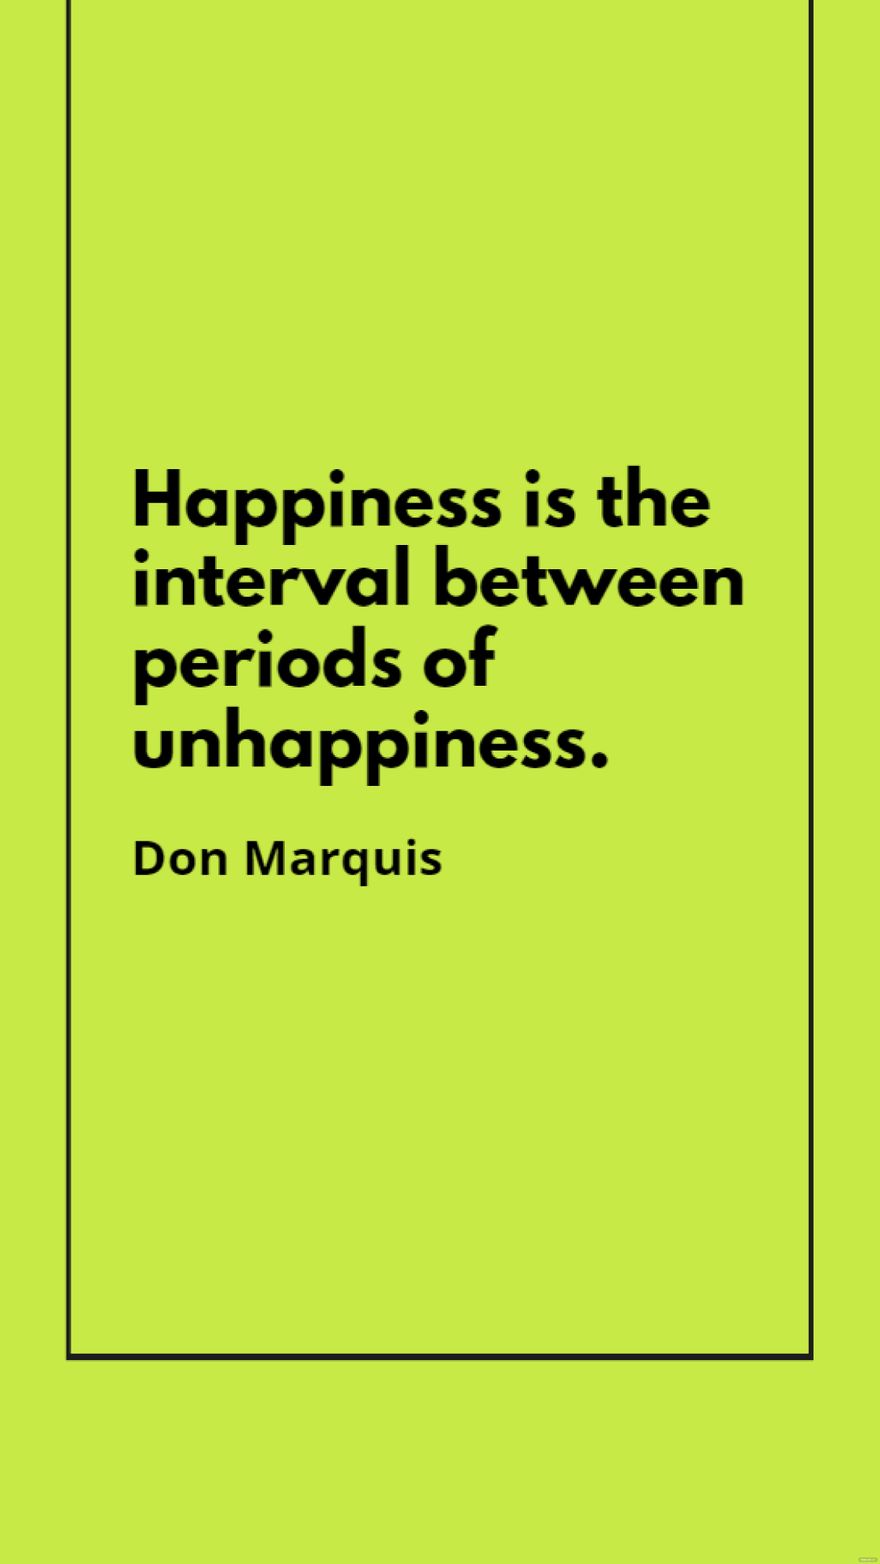 Don Marquis - Happiness is the interval between periods of unhappiness.